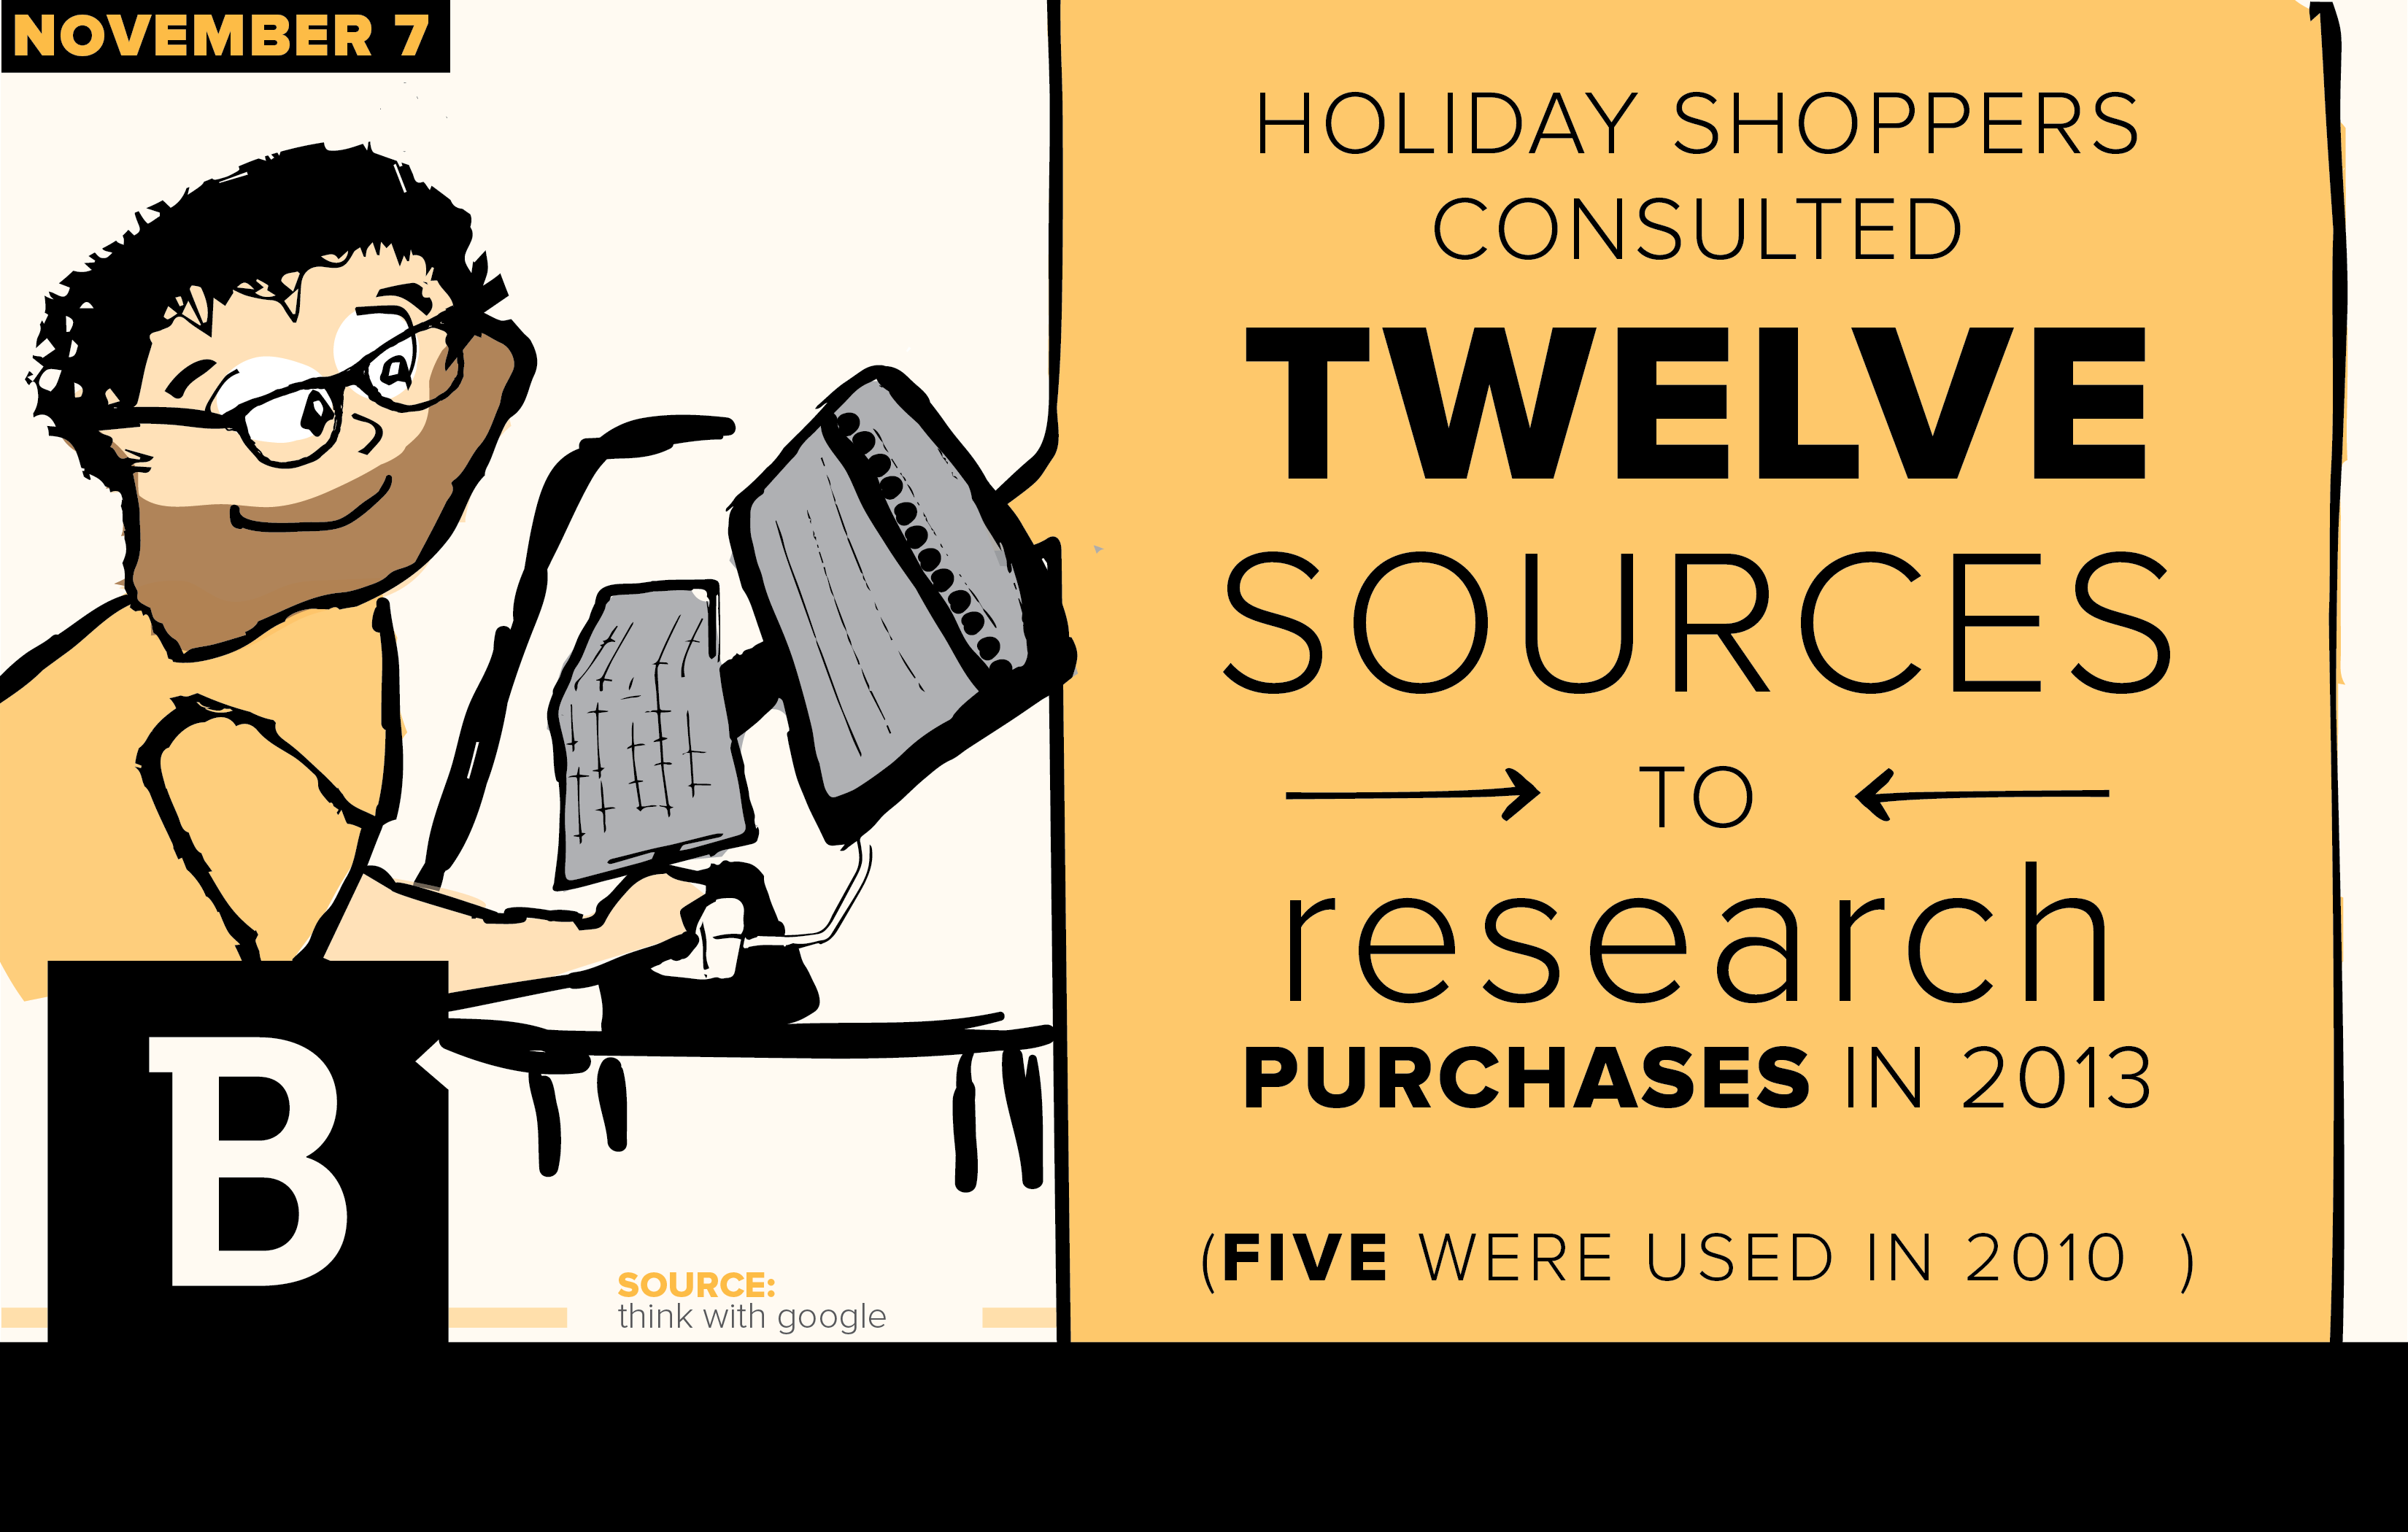 A study found consumers consult about 12 sources on average before buying, which is why cross-channel marketing campaigns are so crucial.